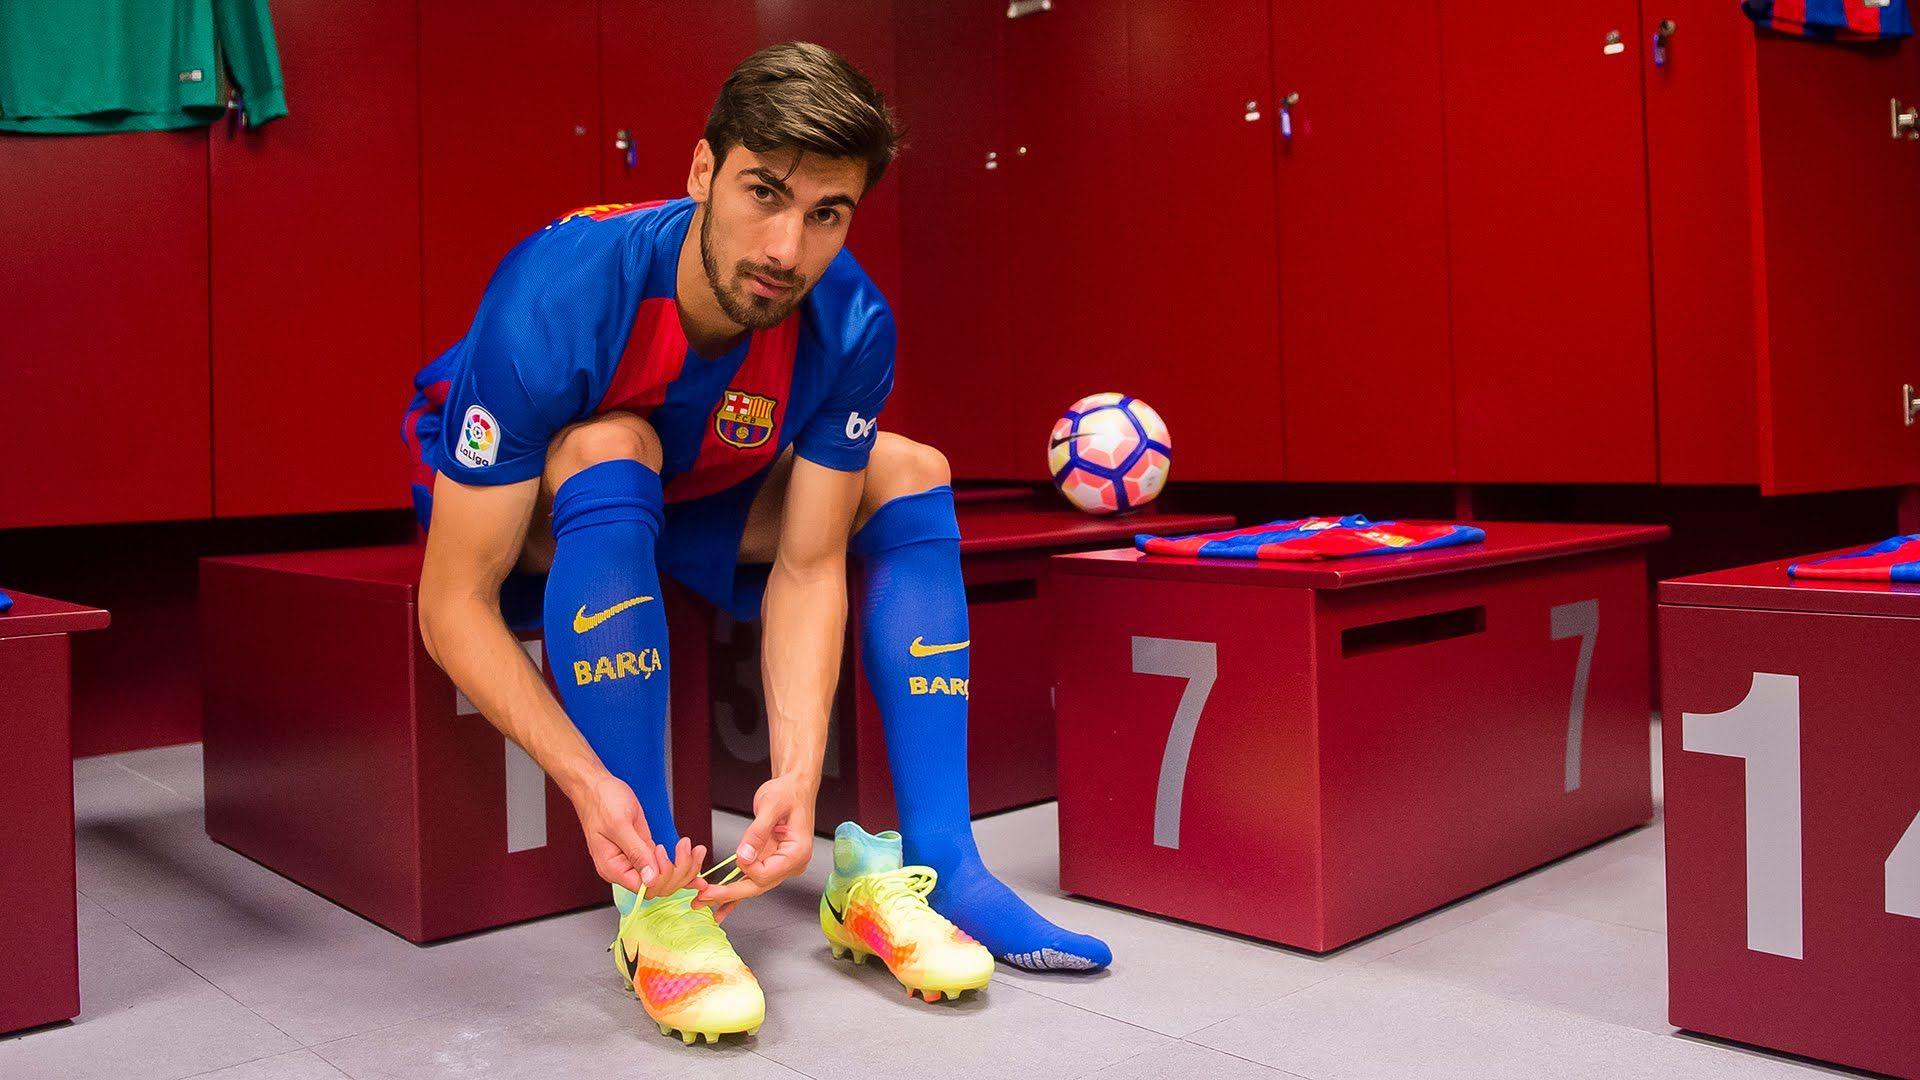 BEHIND THE SCENES: André Gomes' presentation as a FC Barcelona